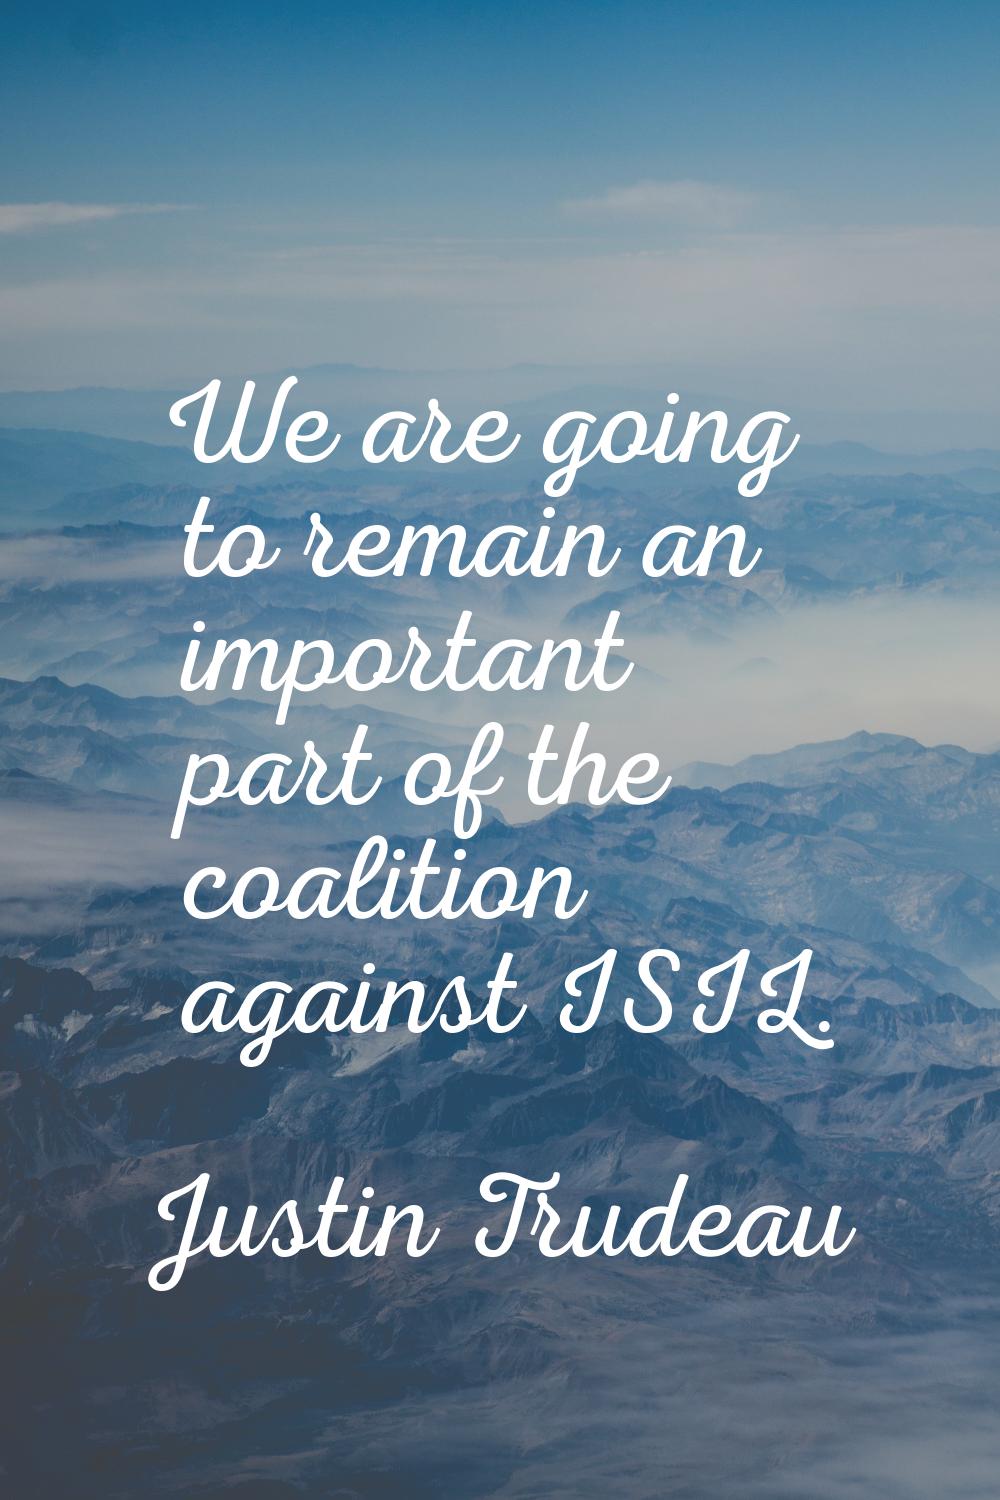 We are going to remain an important part of the coalition against ISIL.